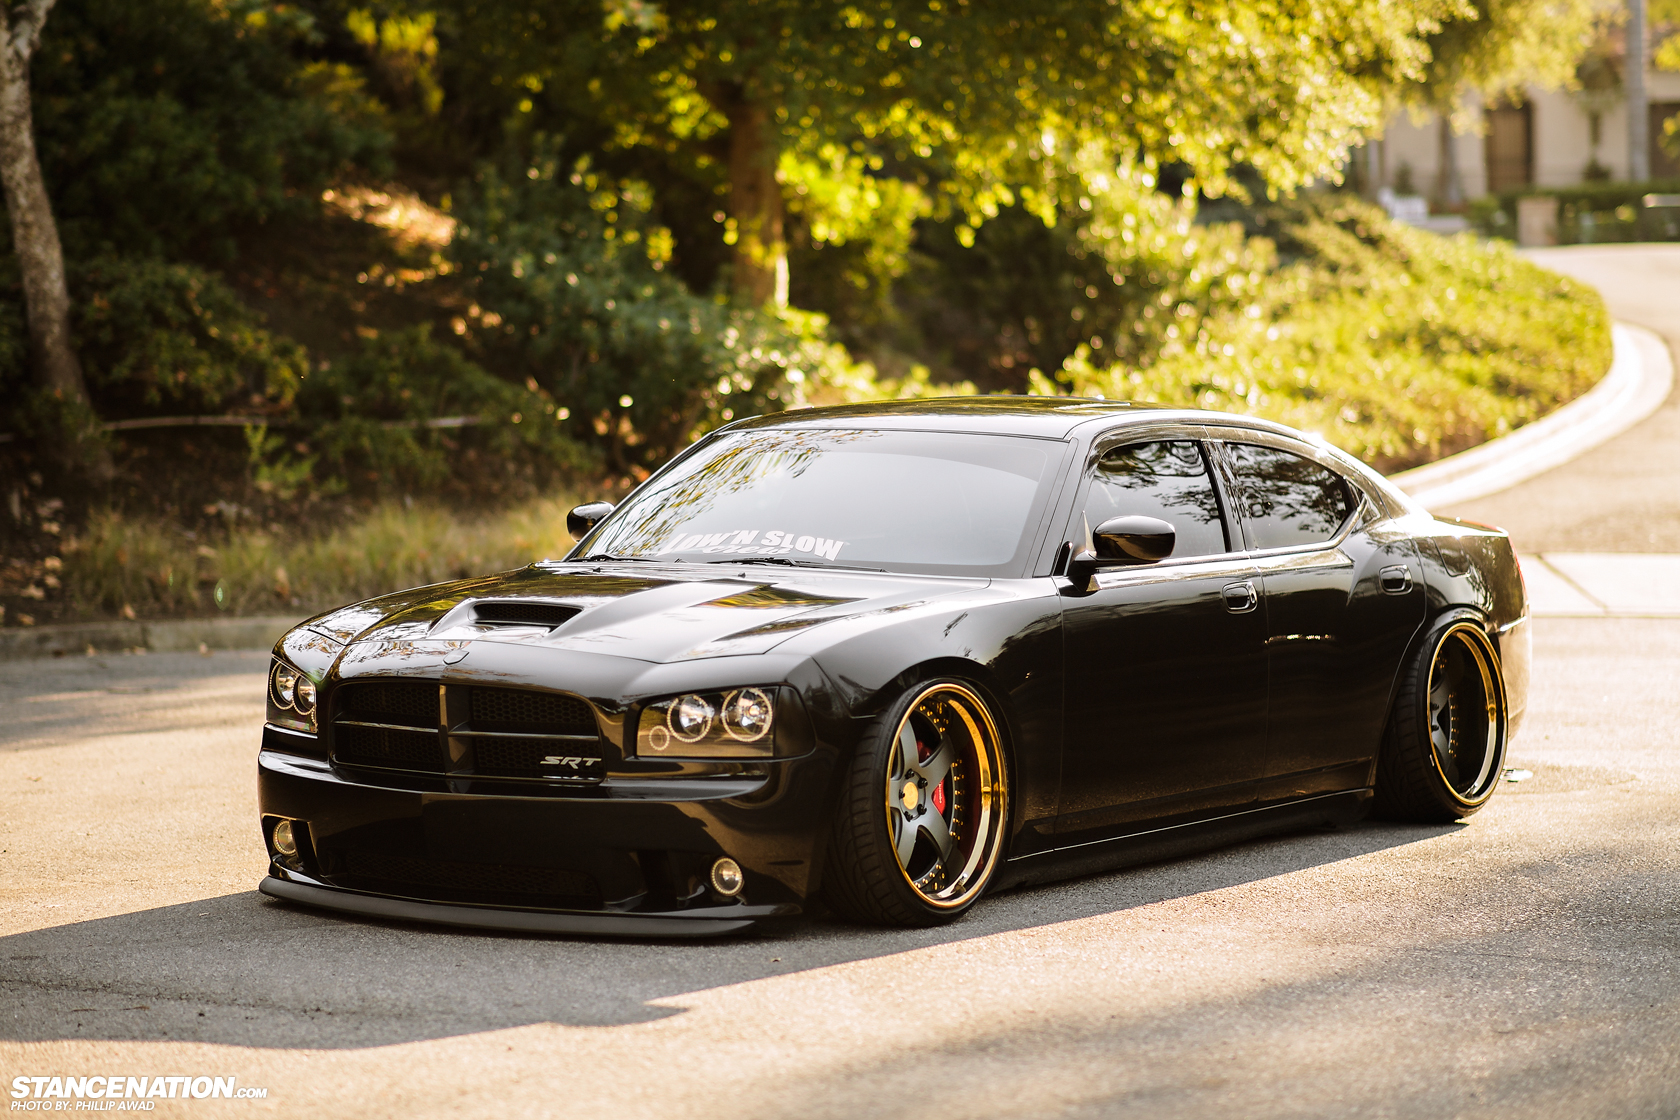 1680x1120 > Dodge Charger Srt8 Wallpapers